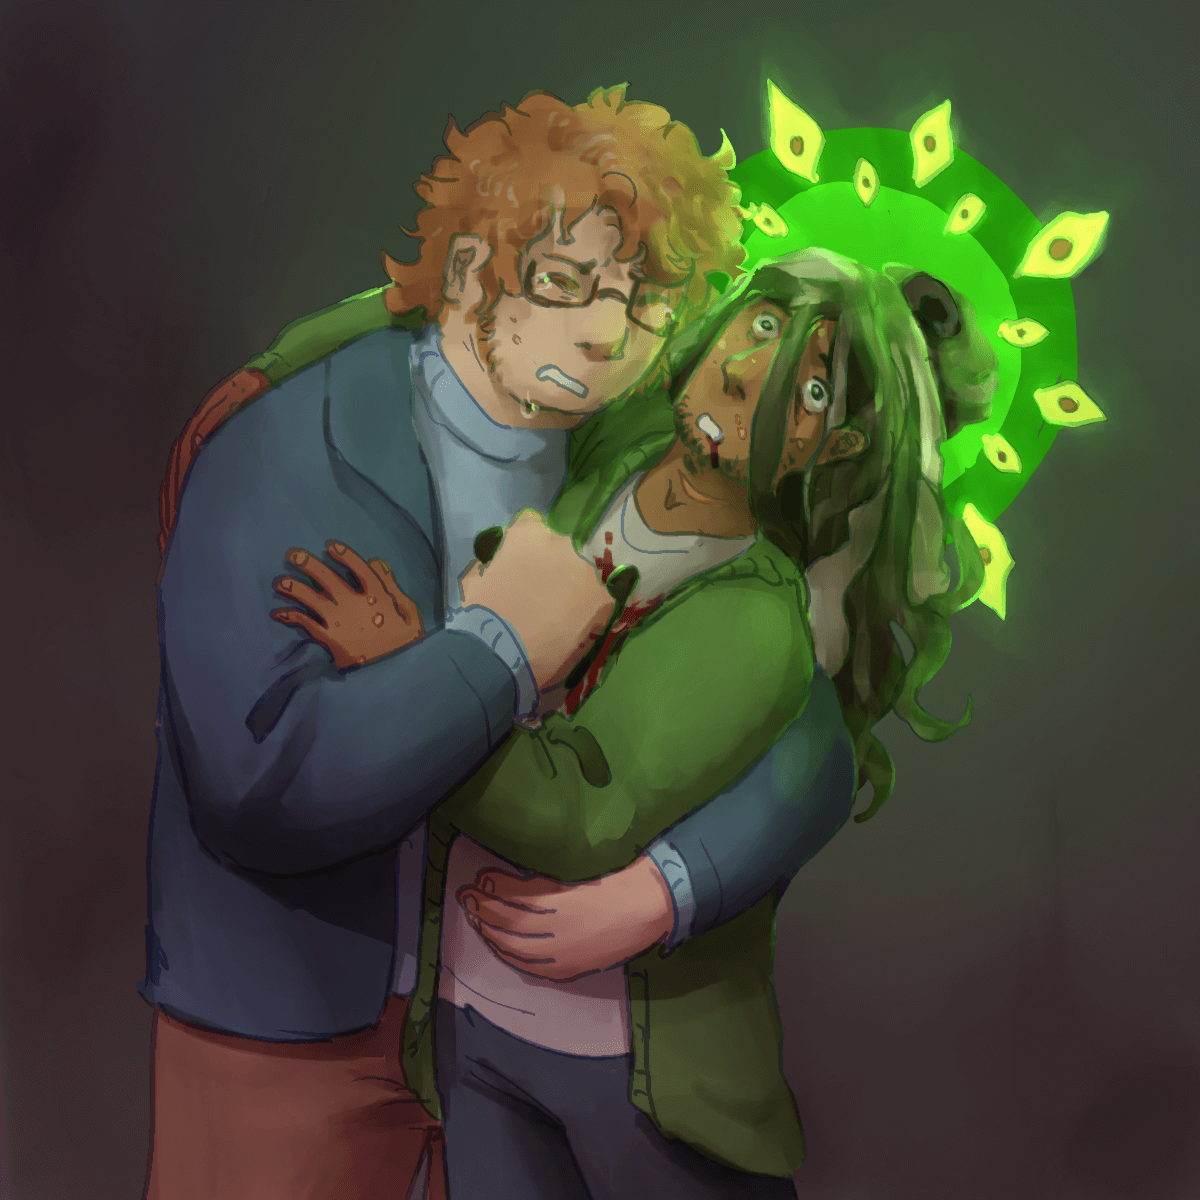 a drawing of martin and jon from the magnus archives. martin is holding jon as
		he stabs him in the chest. he is crying. jon is lying limply in his arms, a halo of glowing green eyes behind his head